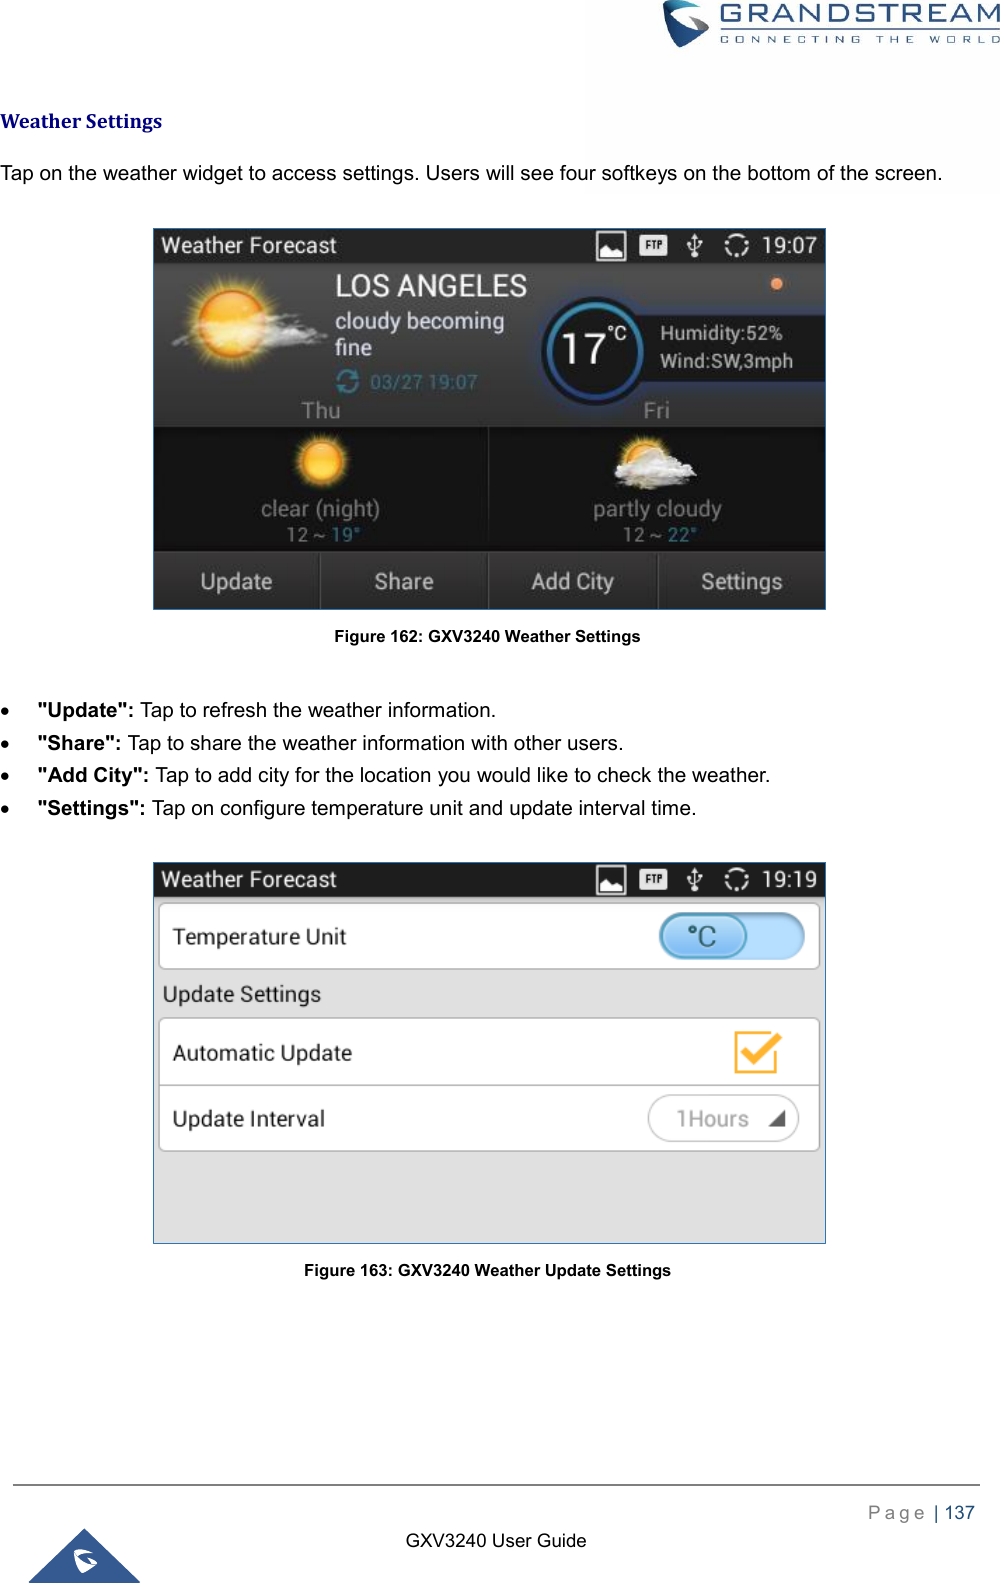    P a g e  | 137    GXV3240 User Guide  Weather Settings Tap on the weather widget to access settings. Users will see four softkeys on the bottom of the screen.   Figure 162: GXV3240 Weather Settings   &quot;Update&quot;: Tap to refresh the weather information.  &quot;Share&quot;: Tap to share the weather information with other users.  &quot;Add City&quot;: Tap to add city for the location you would like to check the weather.  &quot;Settings&quot;: Tap on configure temperature unit and update interval time.   Figure 163: GXV3240 Weather Update Settings  